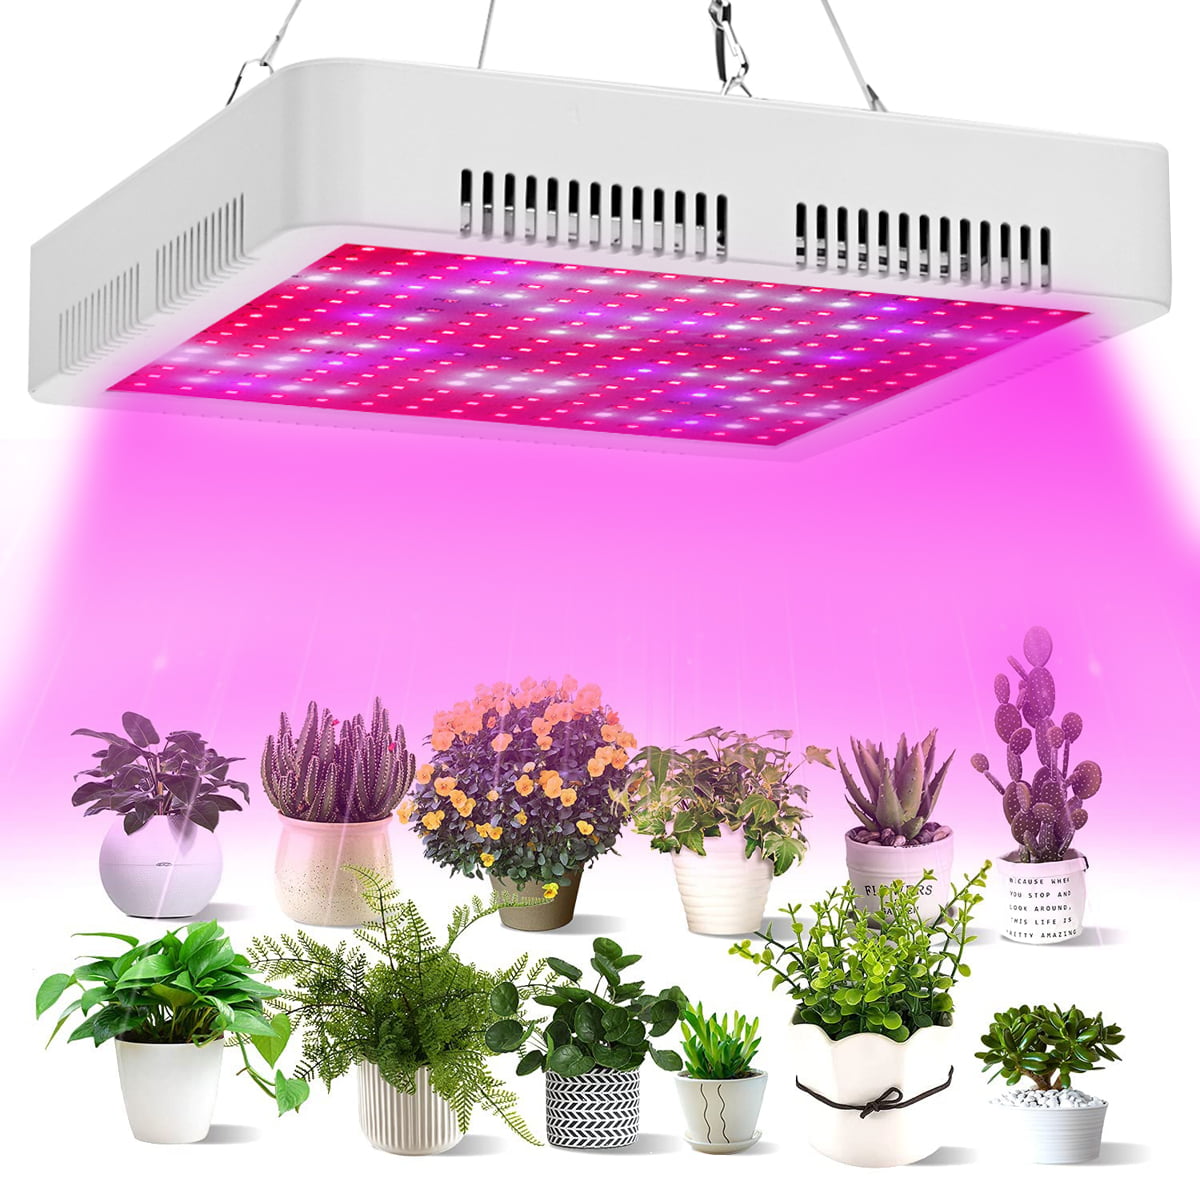 1000W GROWTH LED LAMP INDOOR HERB PLANT GROWING FULL SPECTRUM GROWING LIGHT NEW 